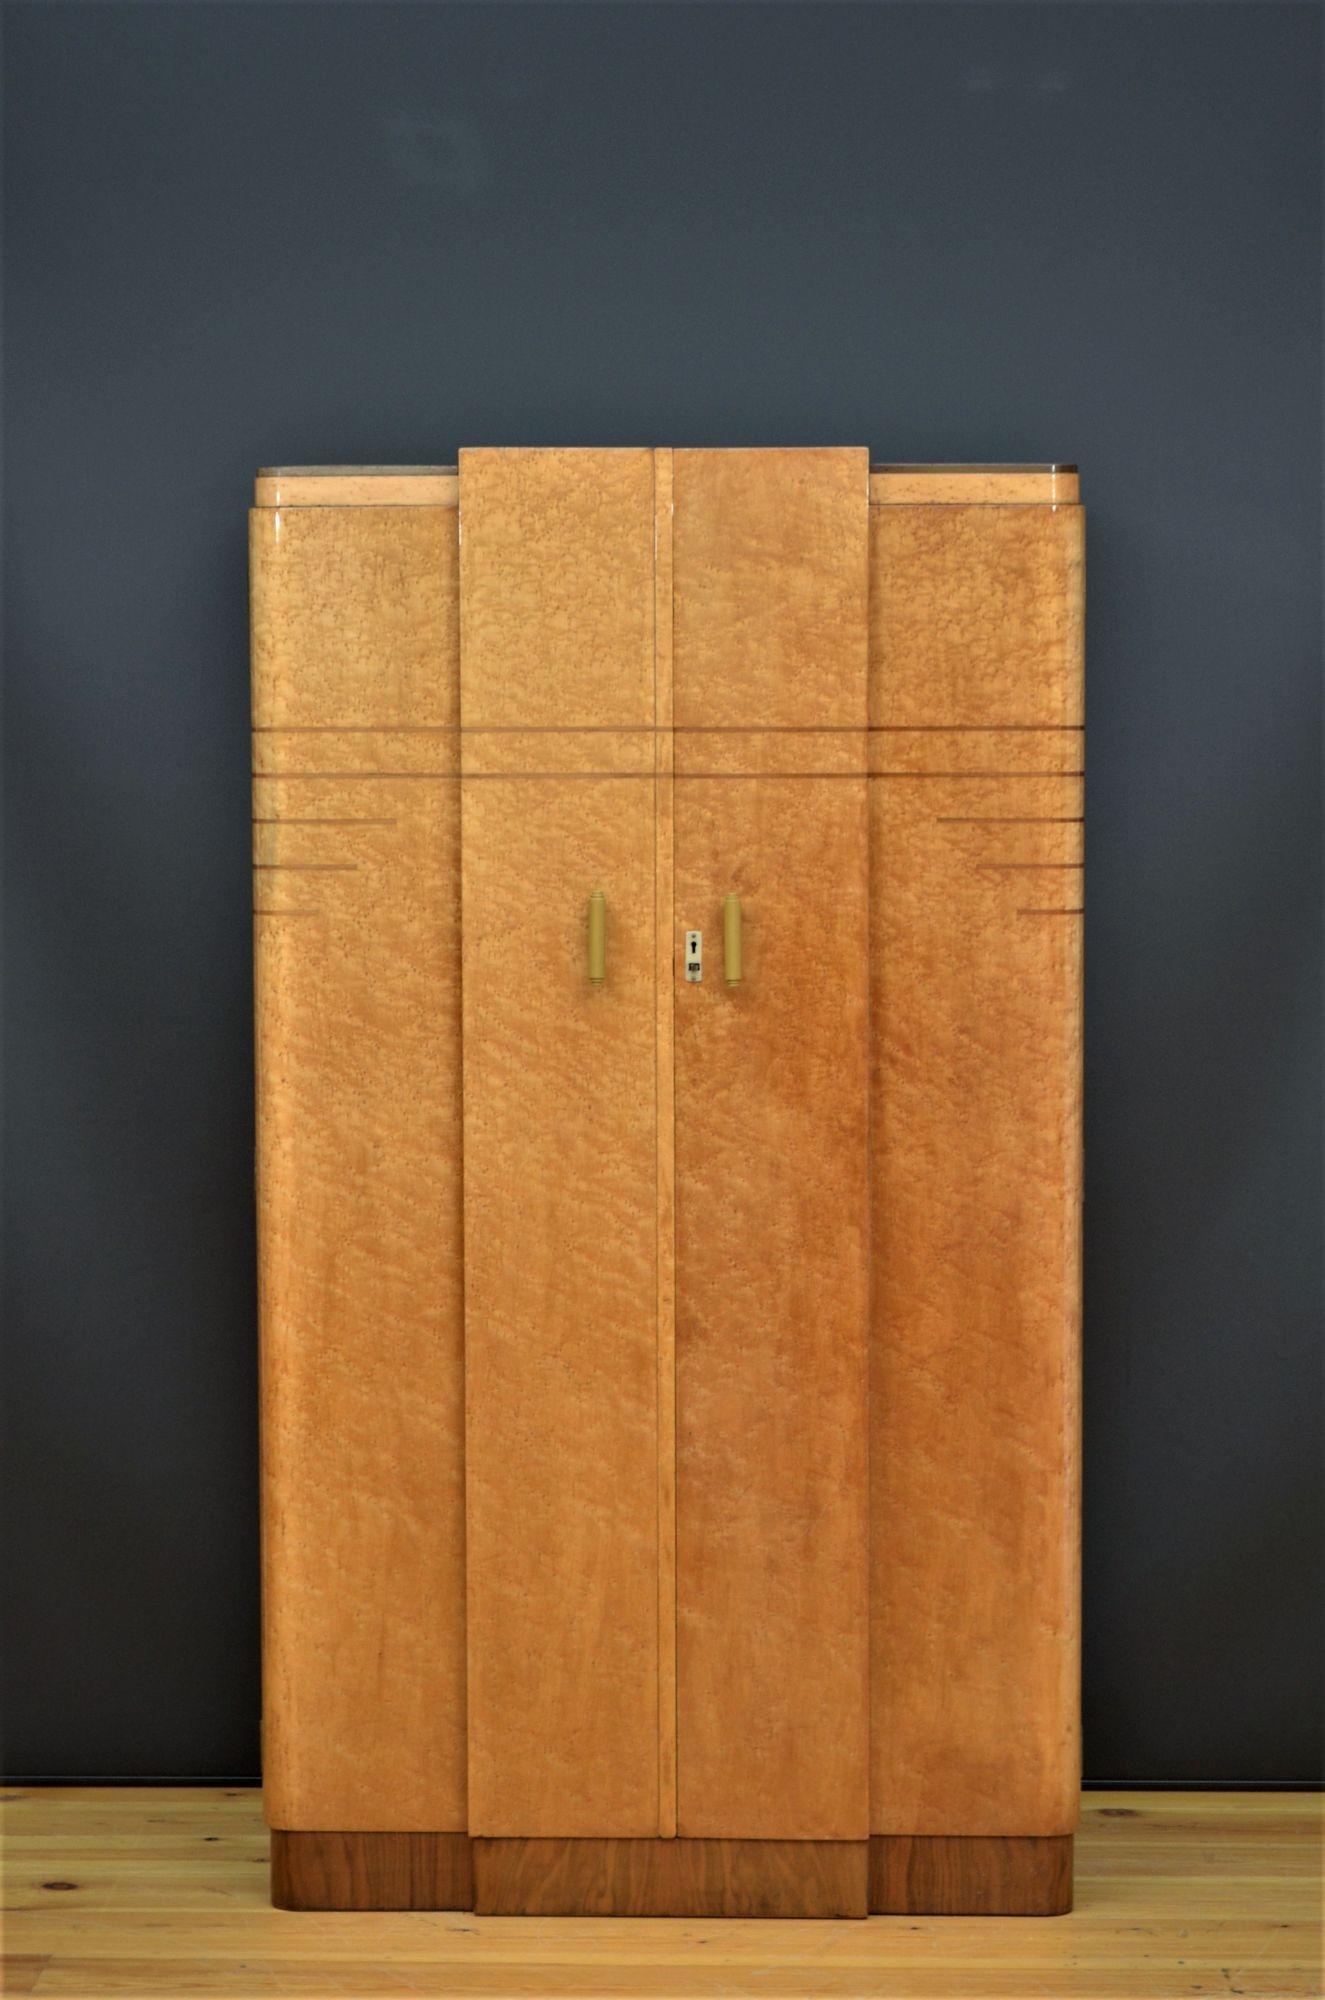 Fine Art Deco Birdseye maple bedroom suite comprising three door wardrobe, two door wardrobe dressing table with a stool and a bed with tow bedside cabinets. All in home ready condition. c1930
2 door wardrobe:
H69.5